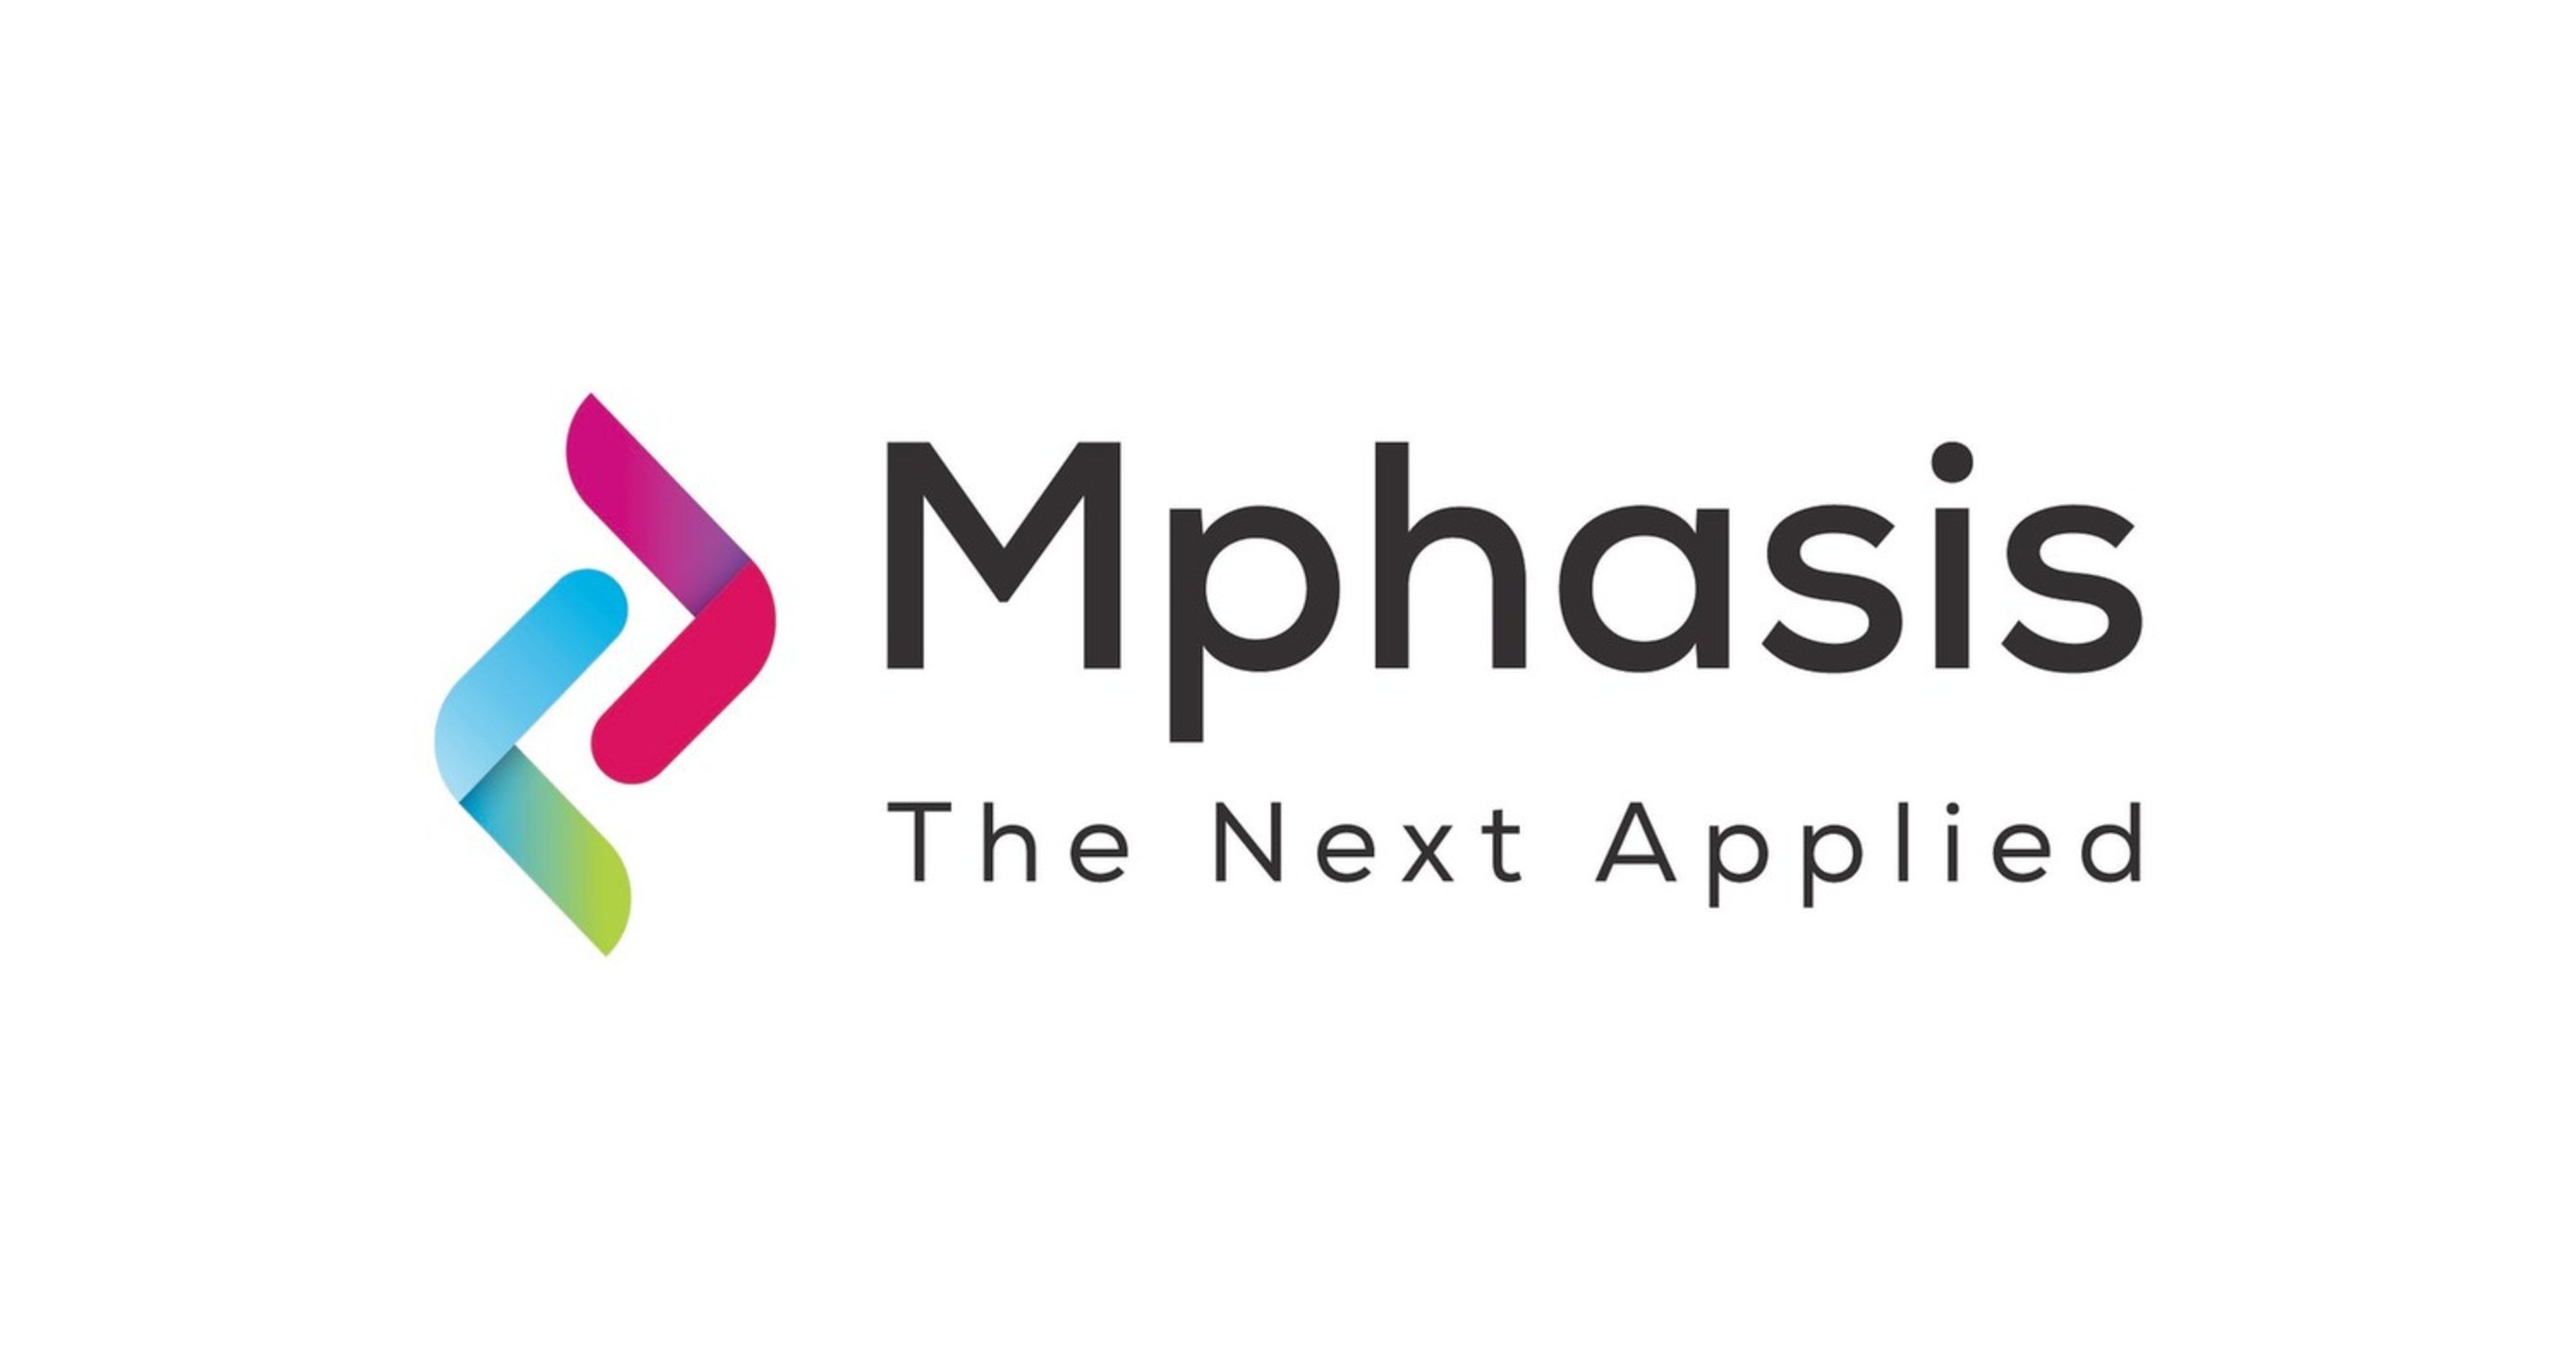 Mphasis named one of the UK’s Top 50 fastest-growing Indian companies 